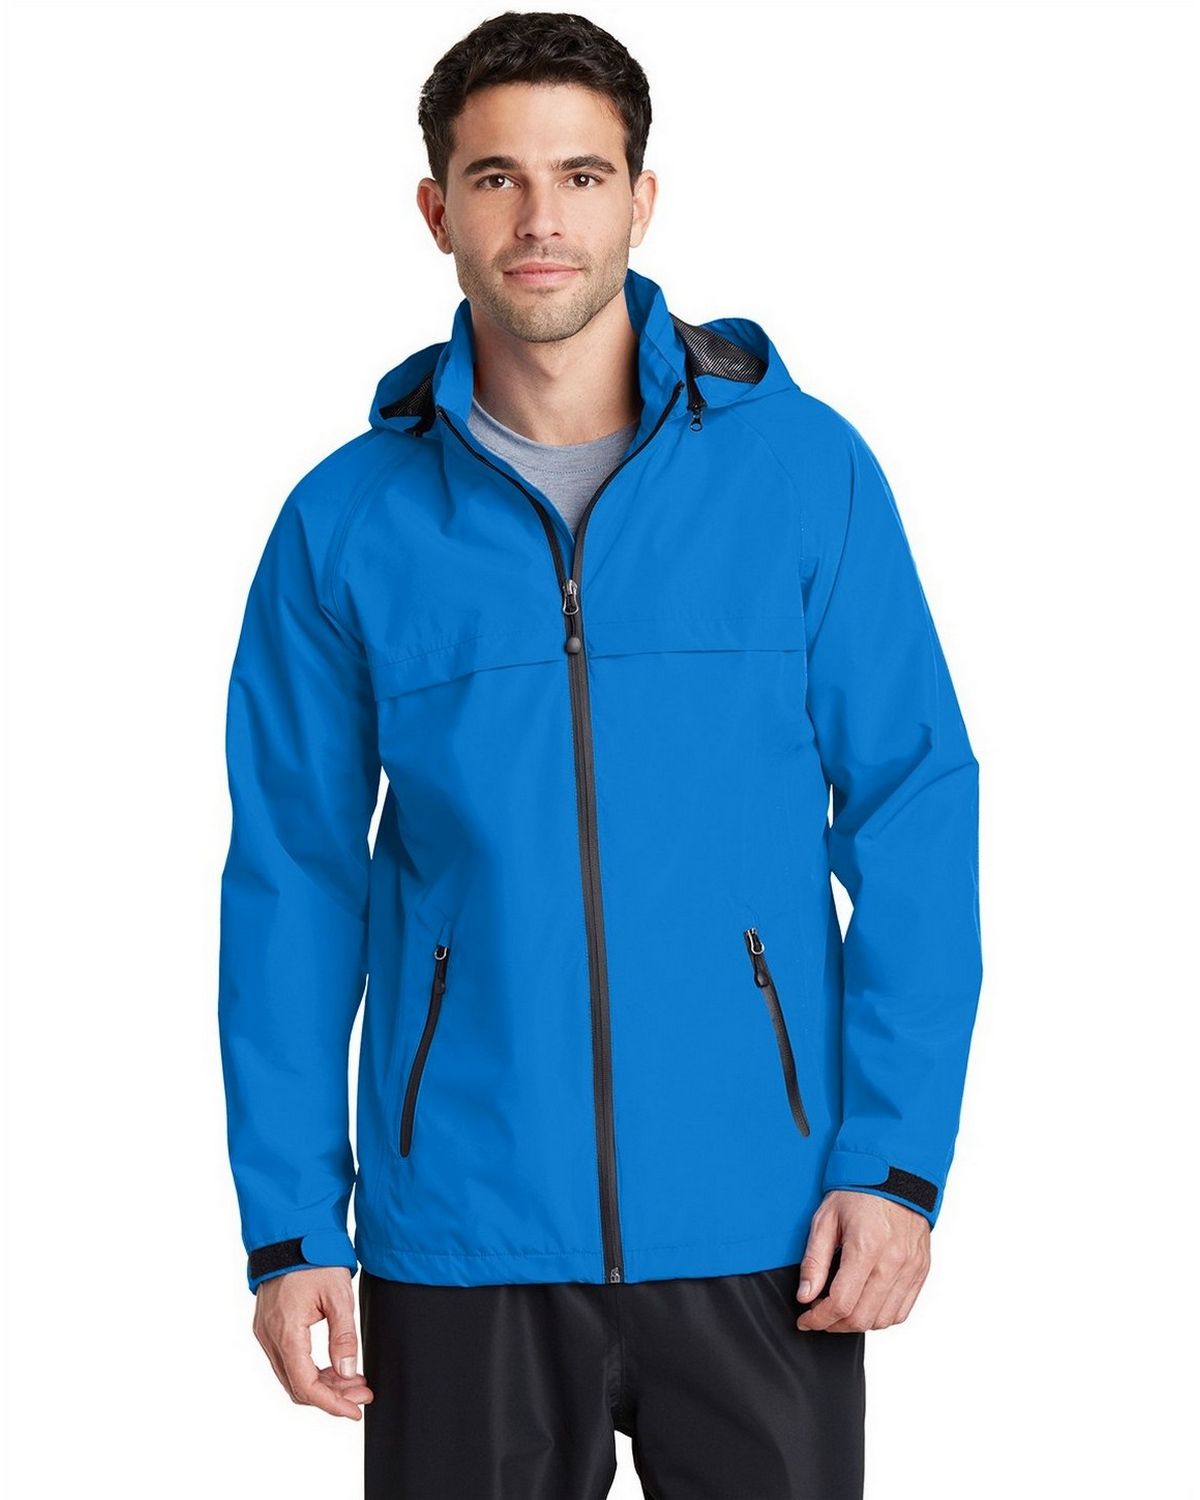 Size Chart for Port Authority J333 Torrent Waterproof Jacket